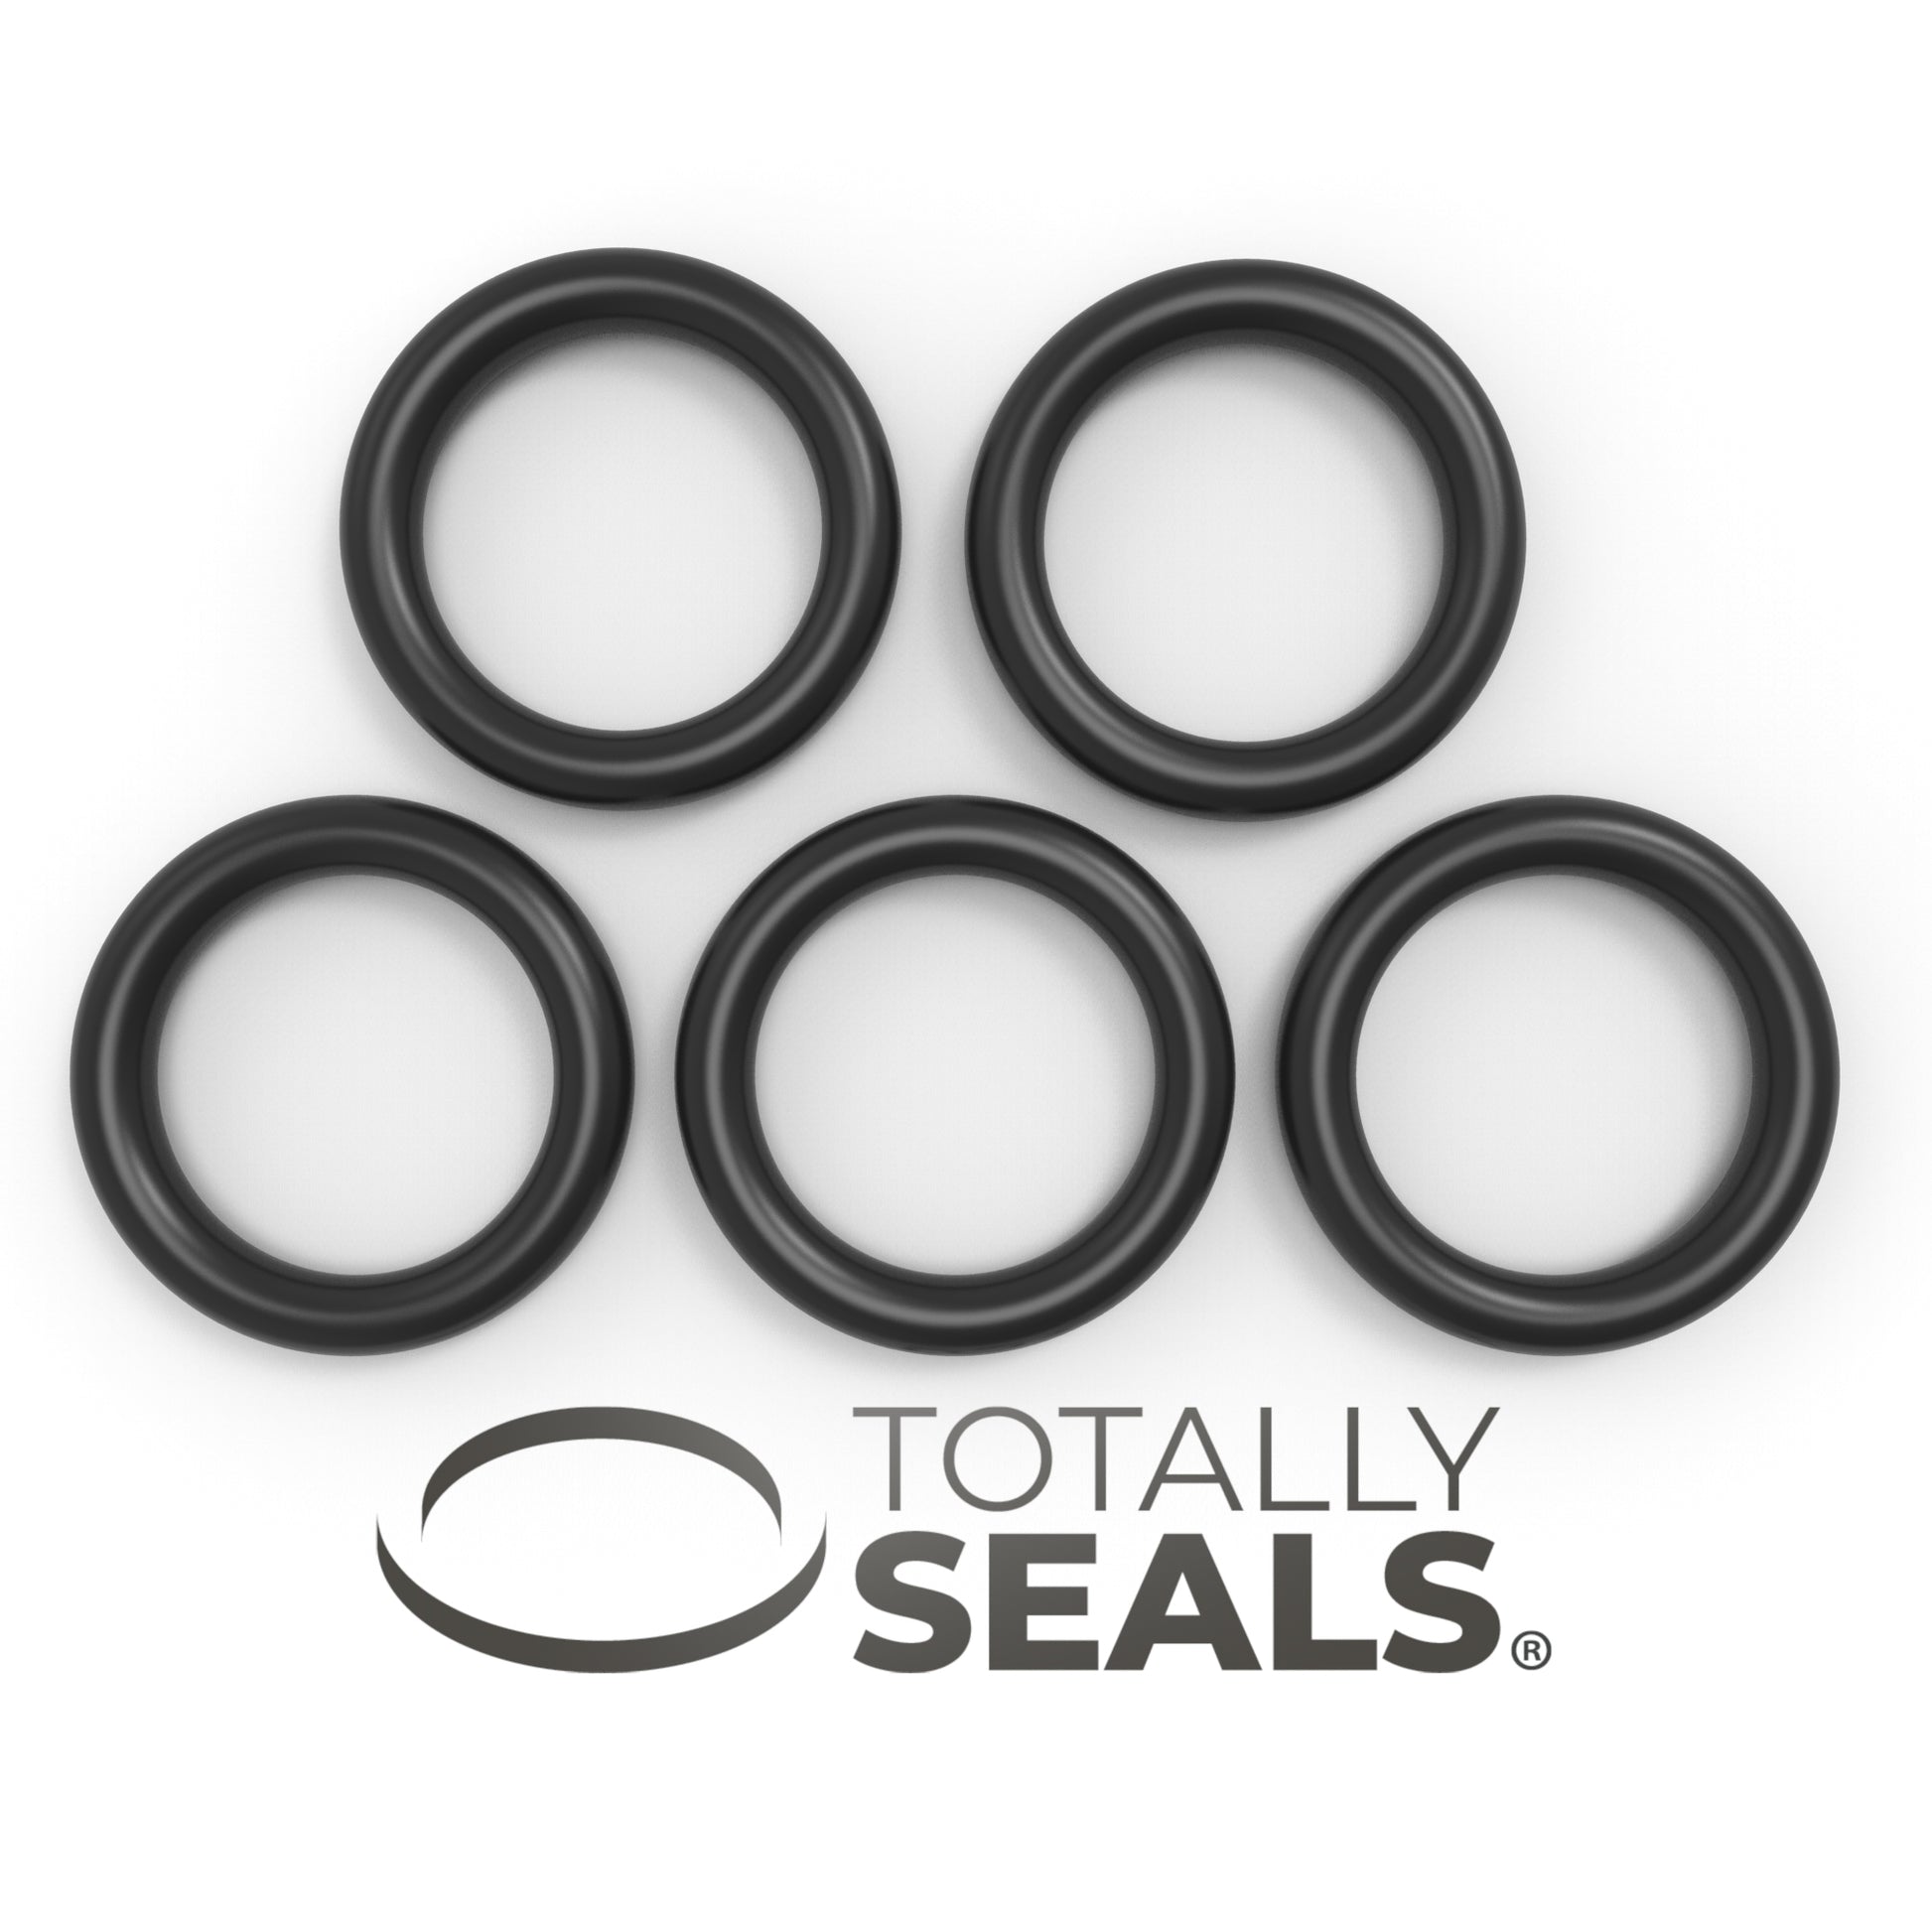 55mm x 4mm (63mm OD) Nitrile O-Rings - Totally Seals®